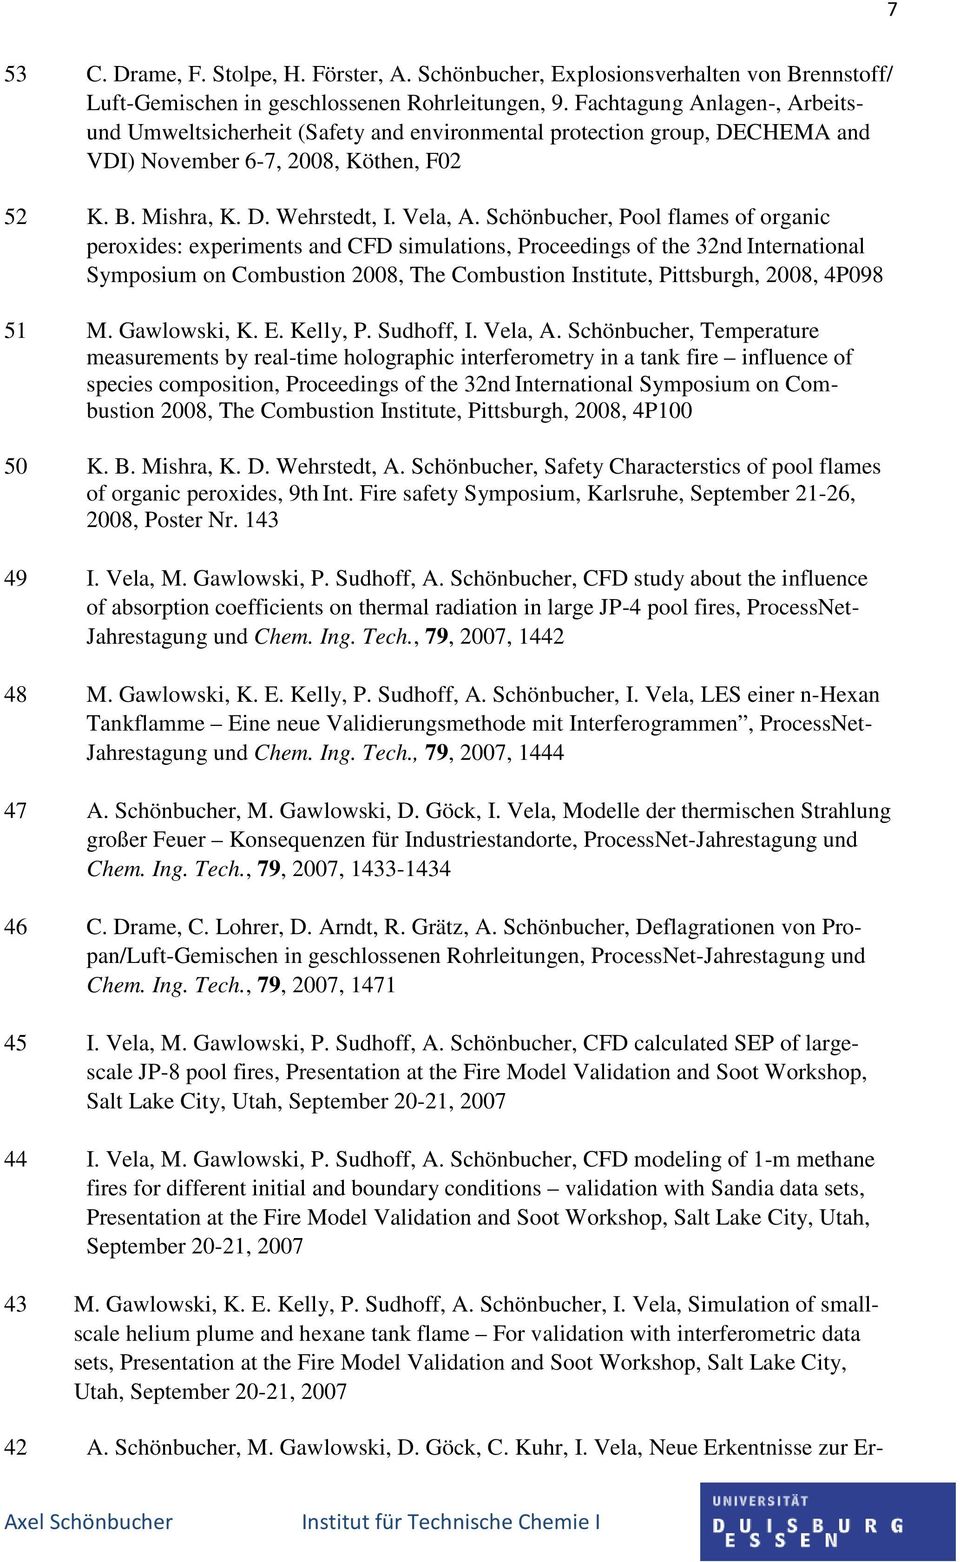 Schönbucher, Pool flames of organic peroxides: experiments and CFD simulations, Proceedings of the 32nd International Symposium on Combustion 2008, The Combustion Institute, Pittsburgh, 2008, 4P098